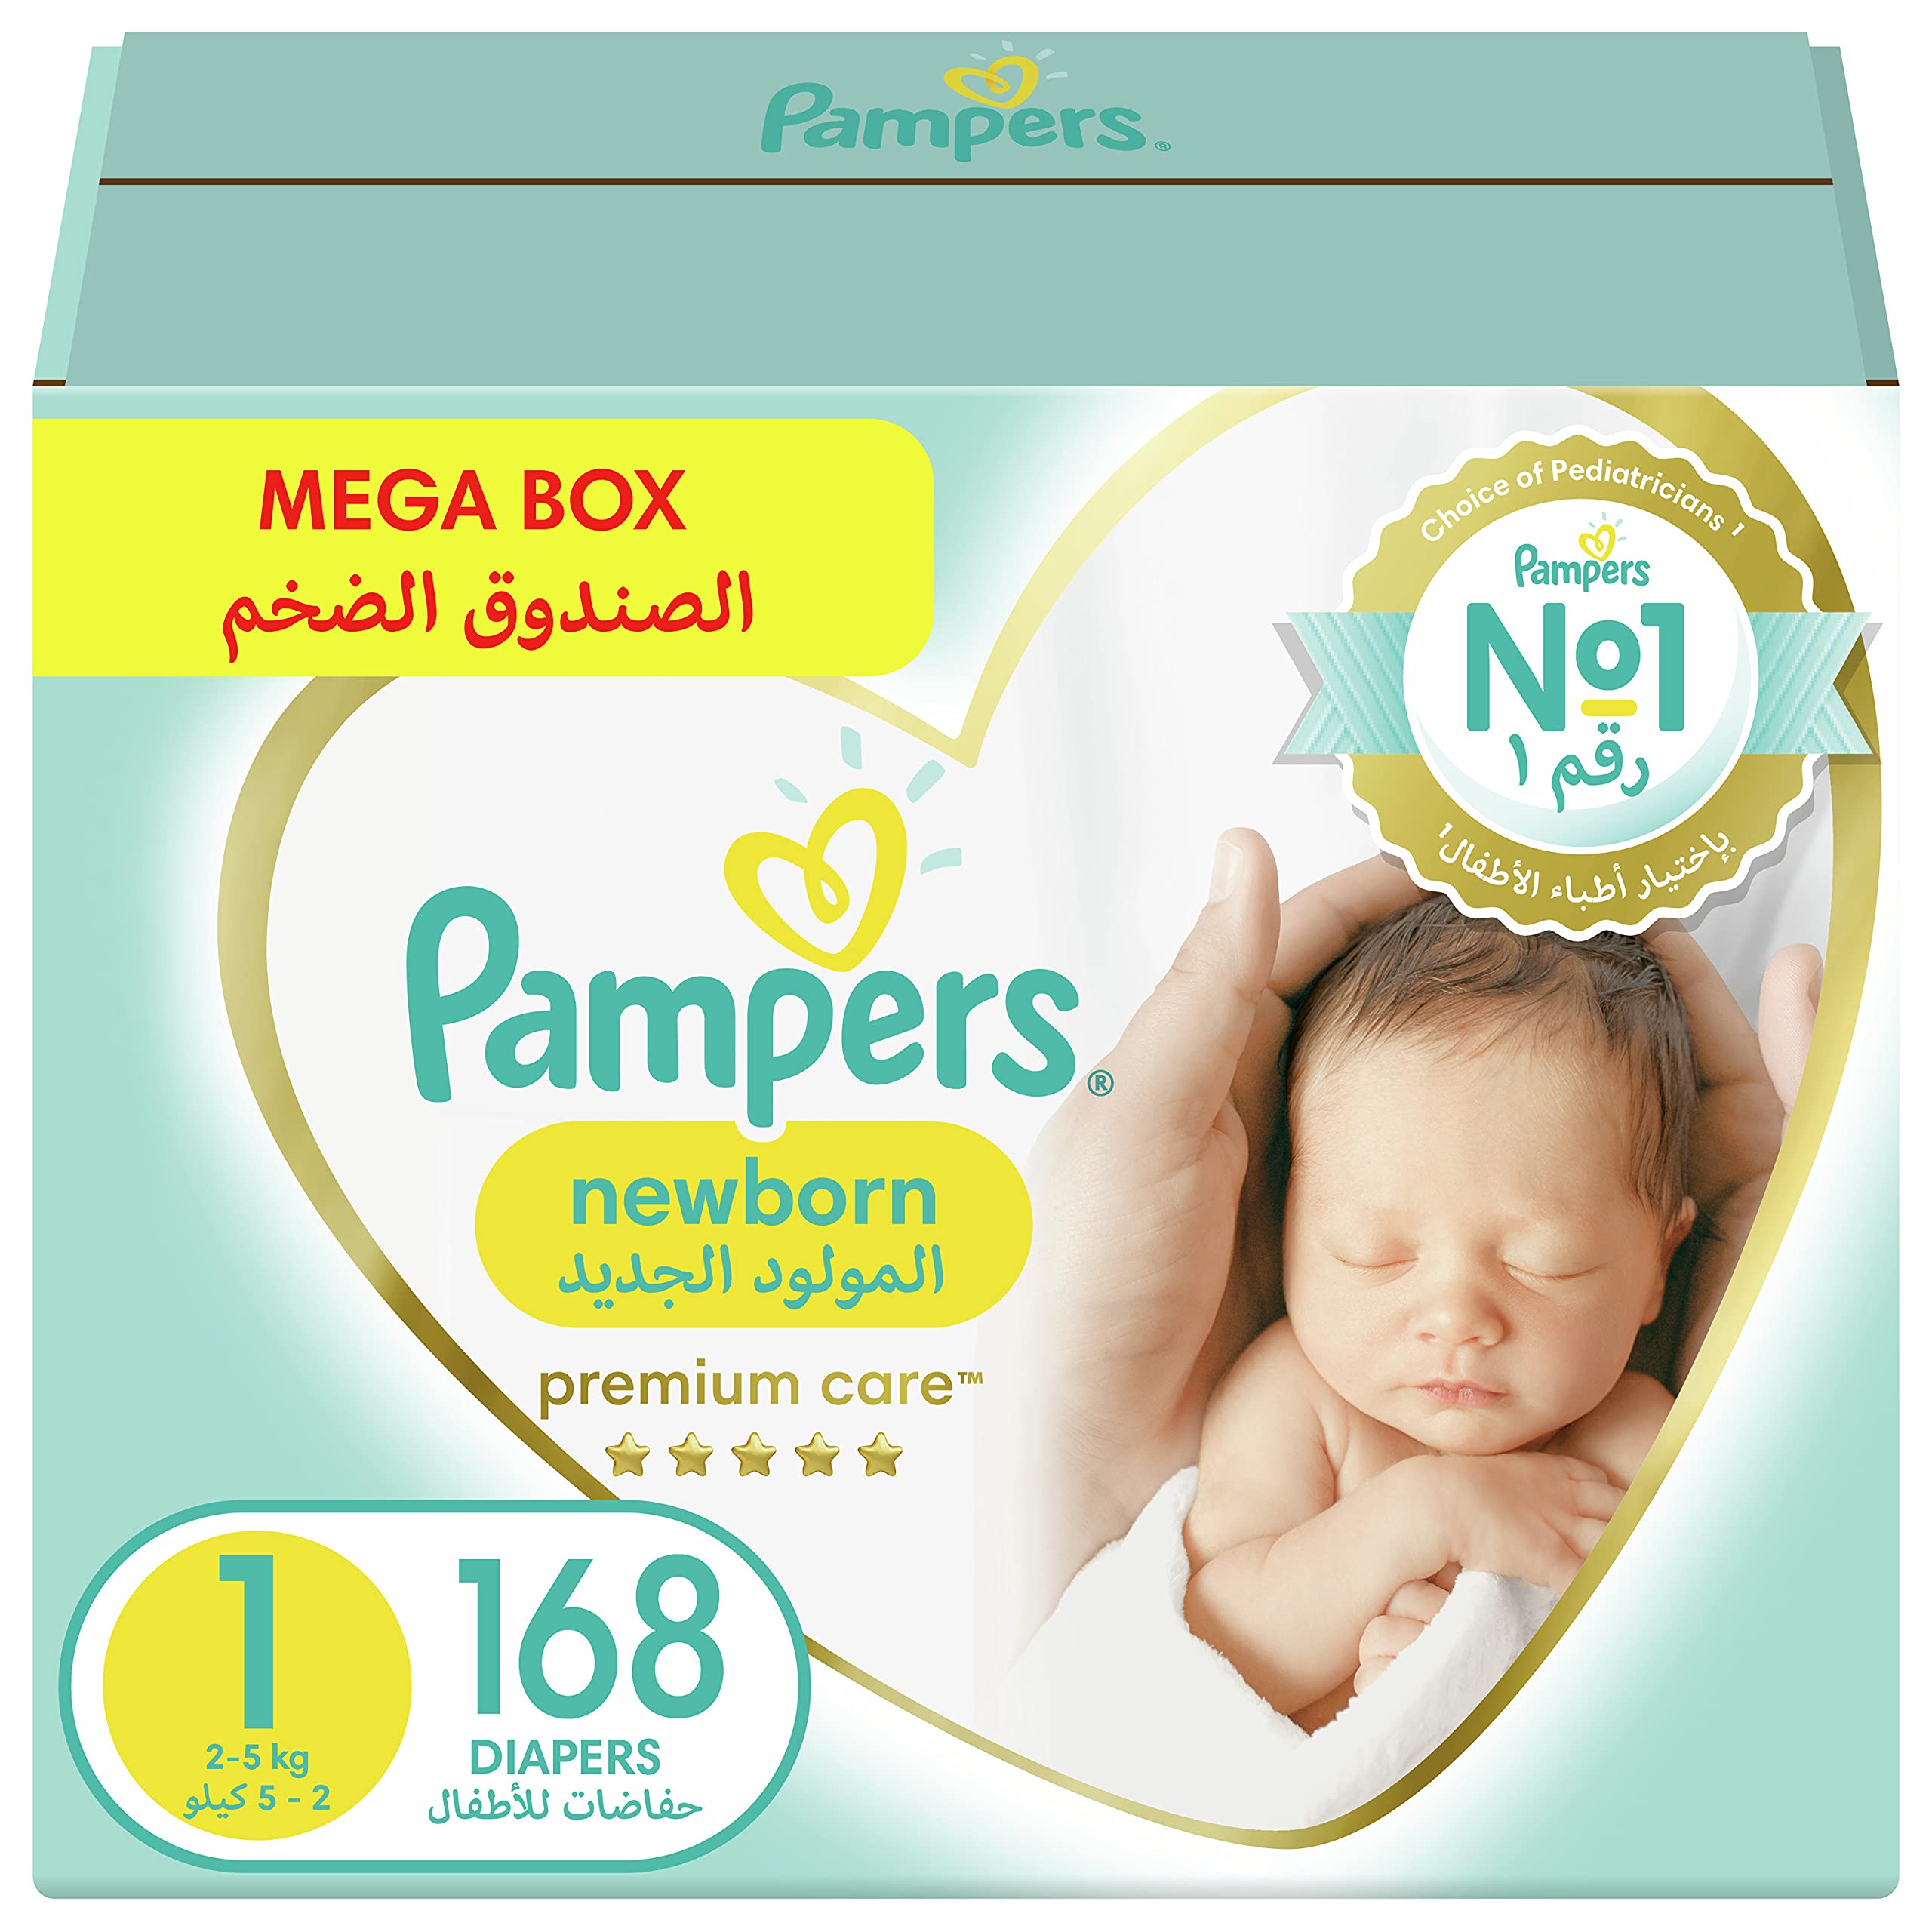 selgros pampers active rossmann